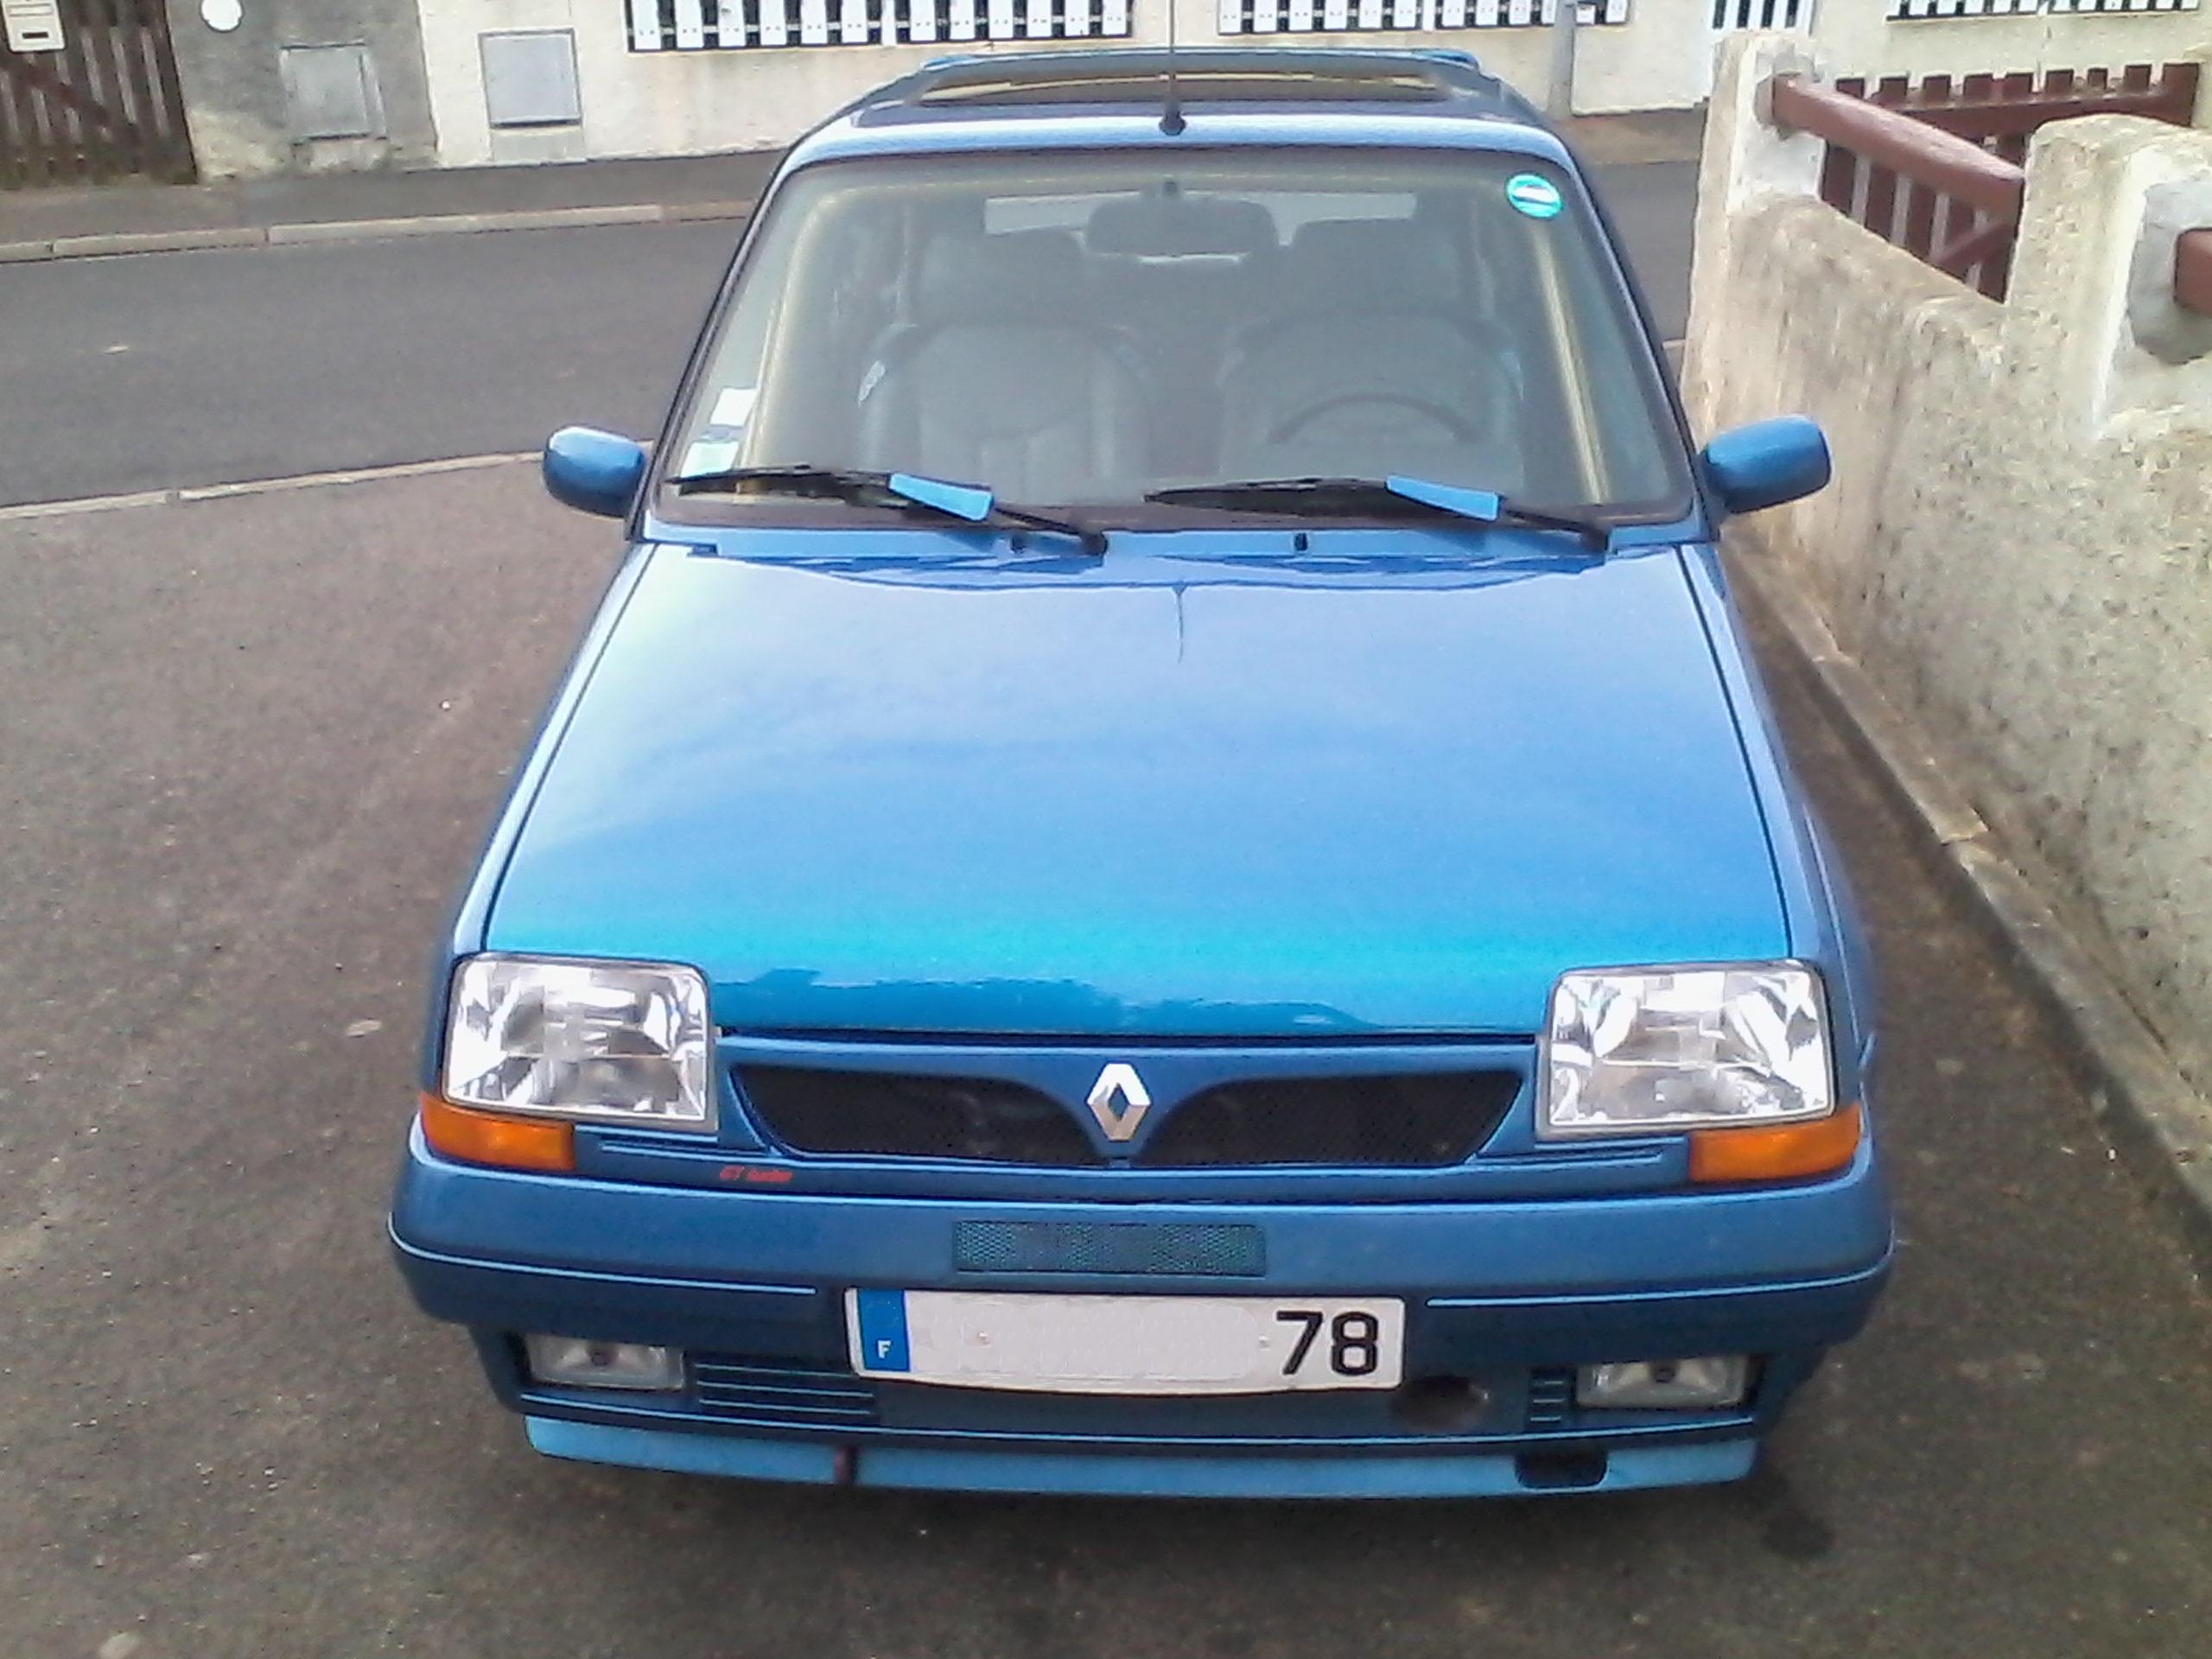 RENAULT Super 5 GT Turbo ie Phase 1